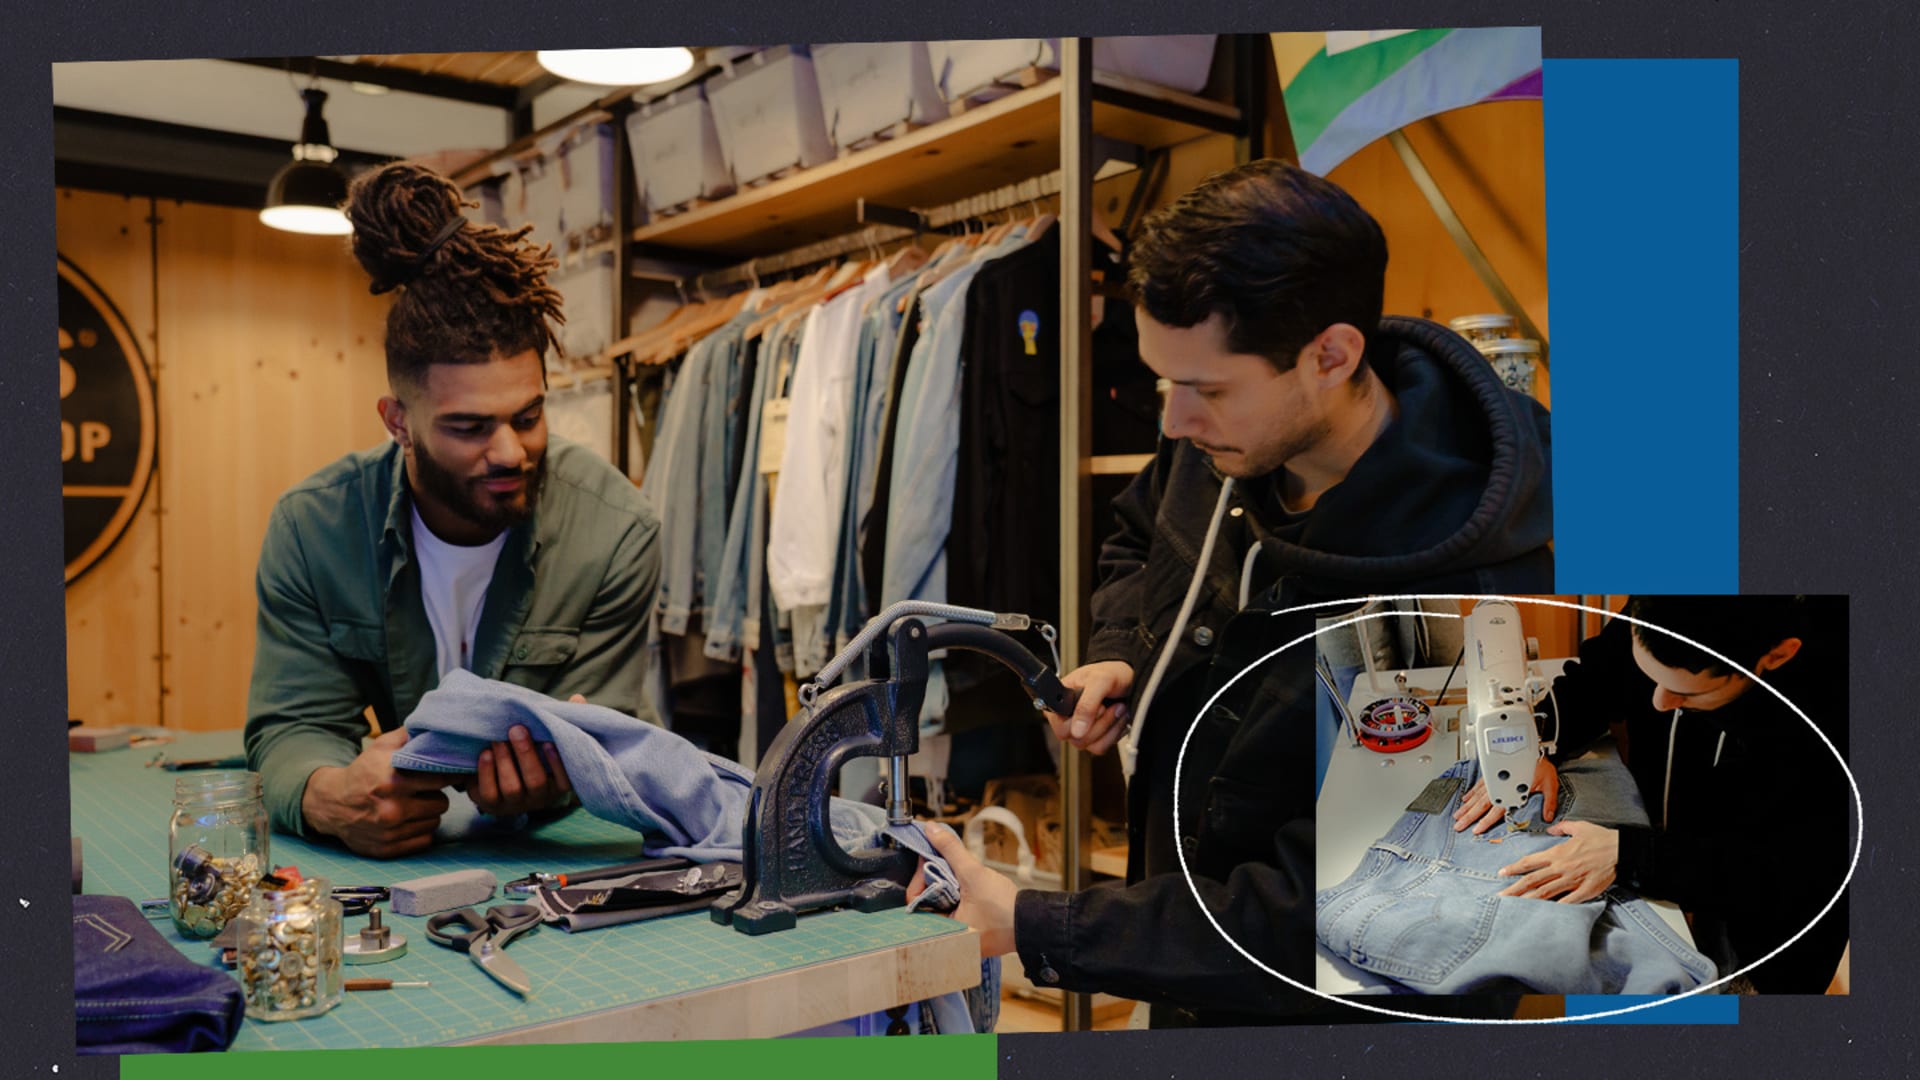 How Pro Linebacker Fred Warner Repairs Denim at the Levi's® Tailor Shop |  Complex